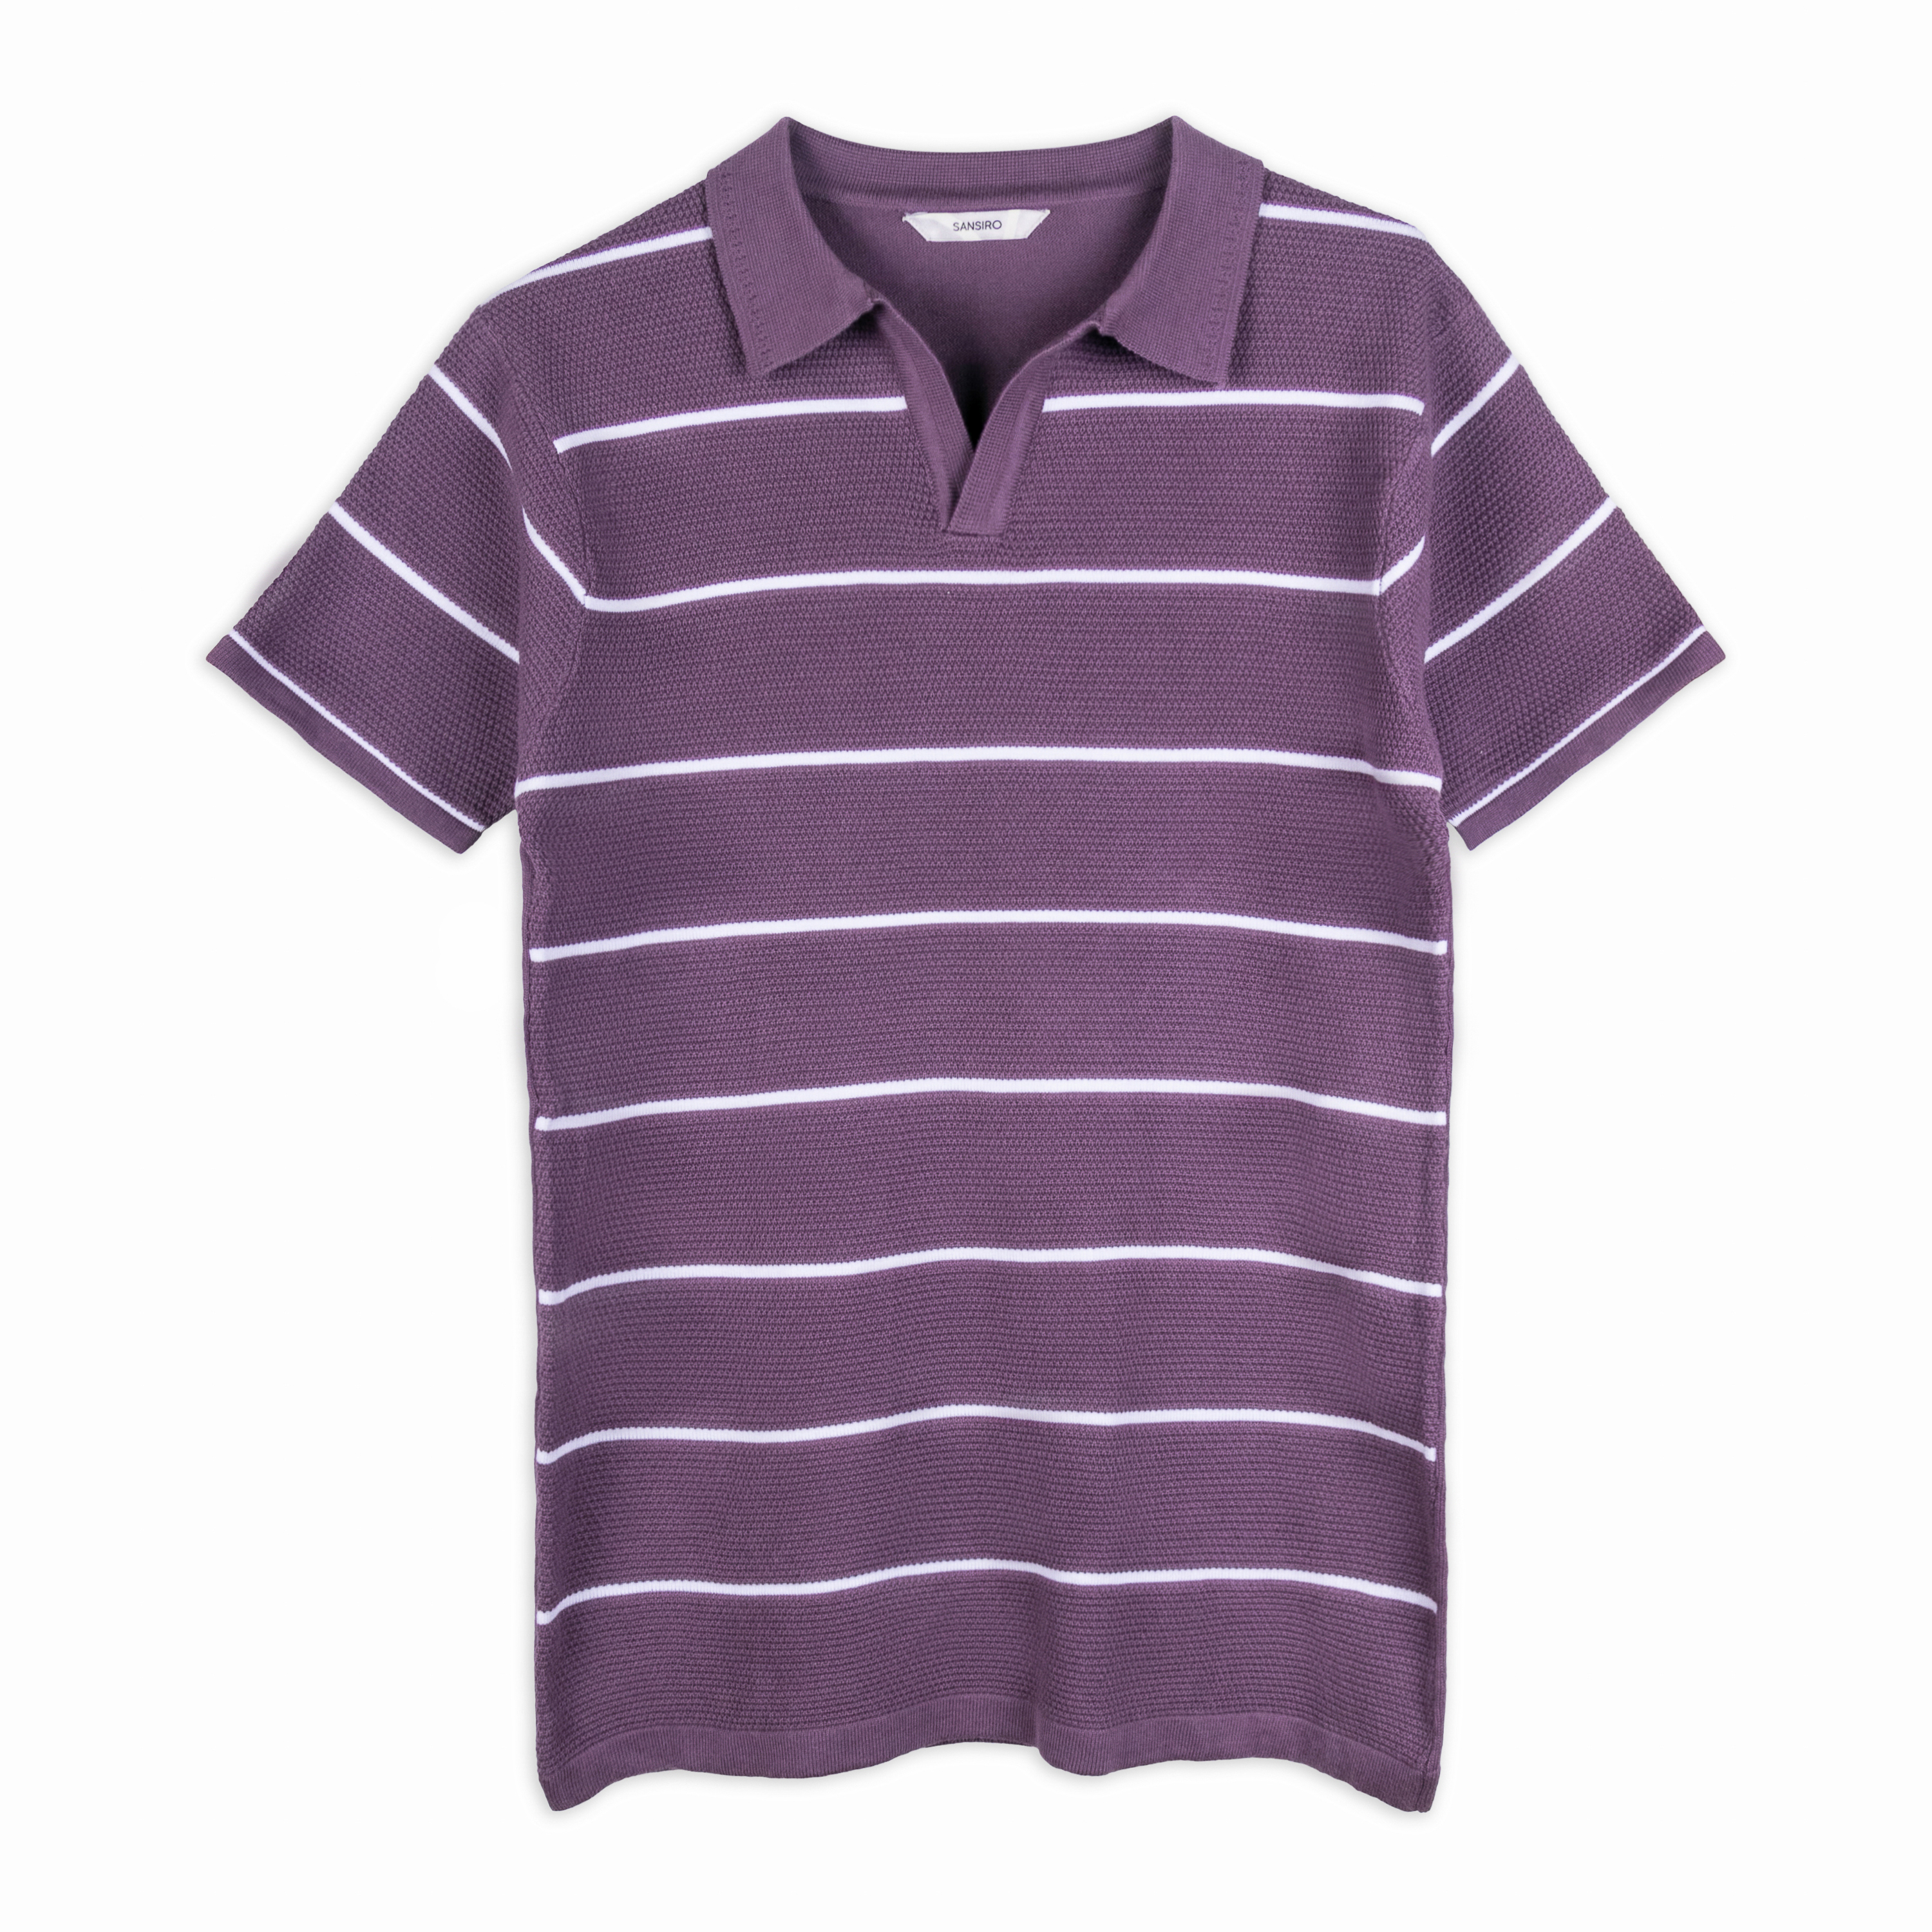 Classic Narrow Sailor Stripes T-Shirt with Round Nneck